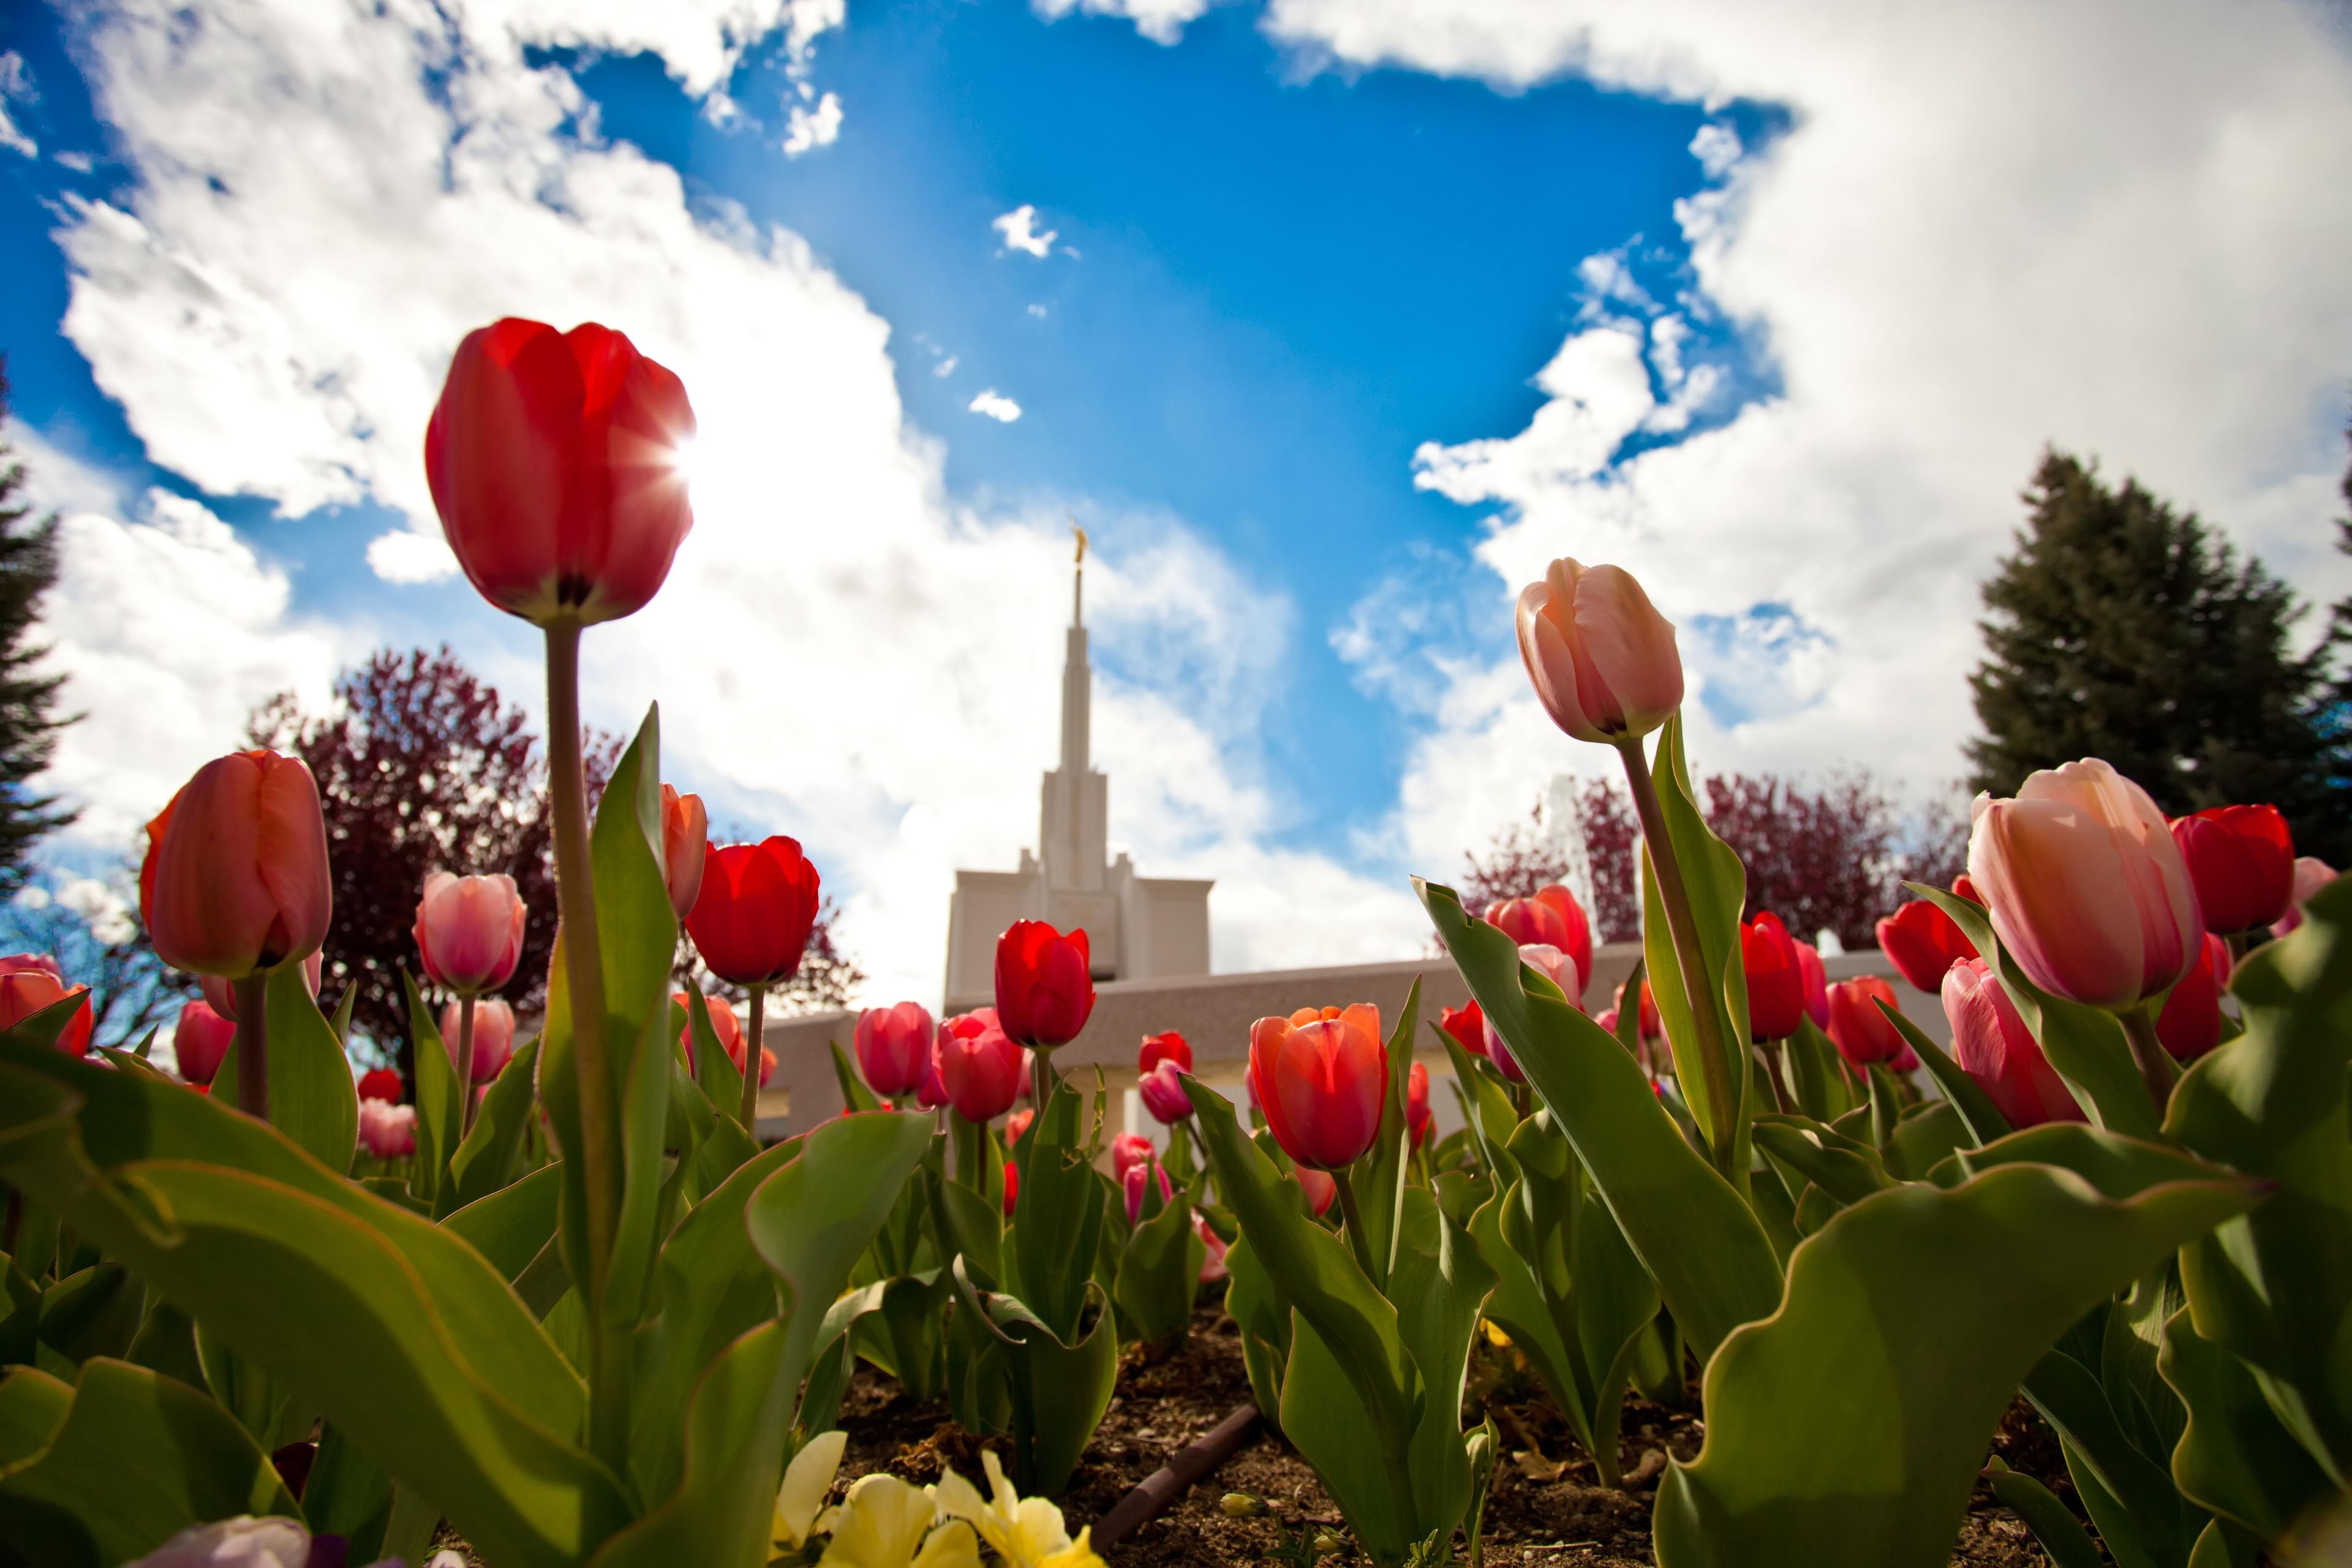 A view of the Denver Colorado Temple from the temple grounds.